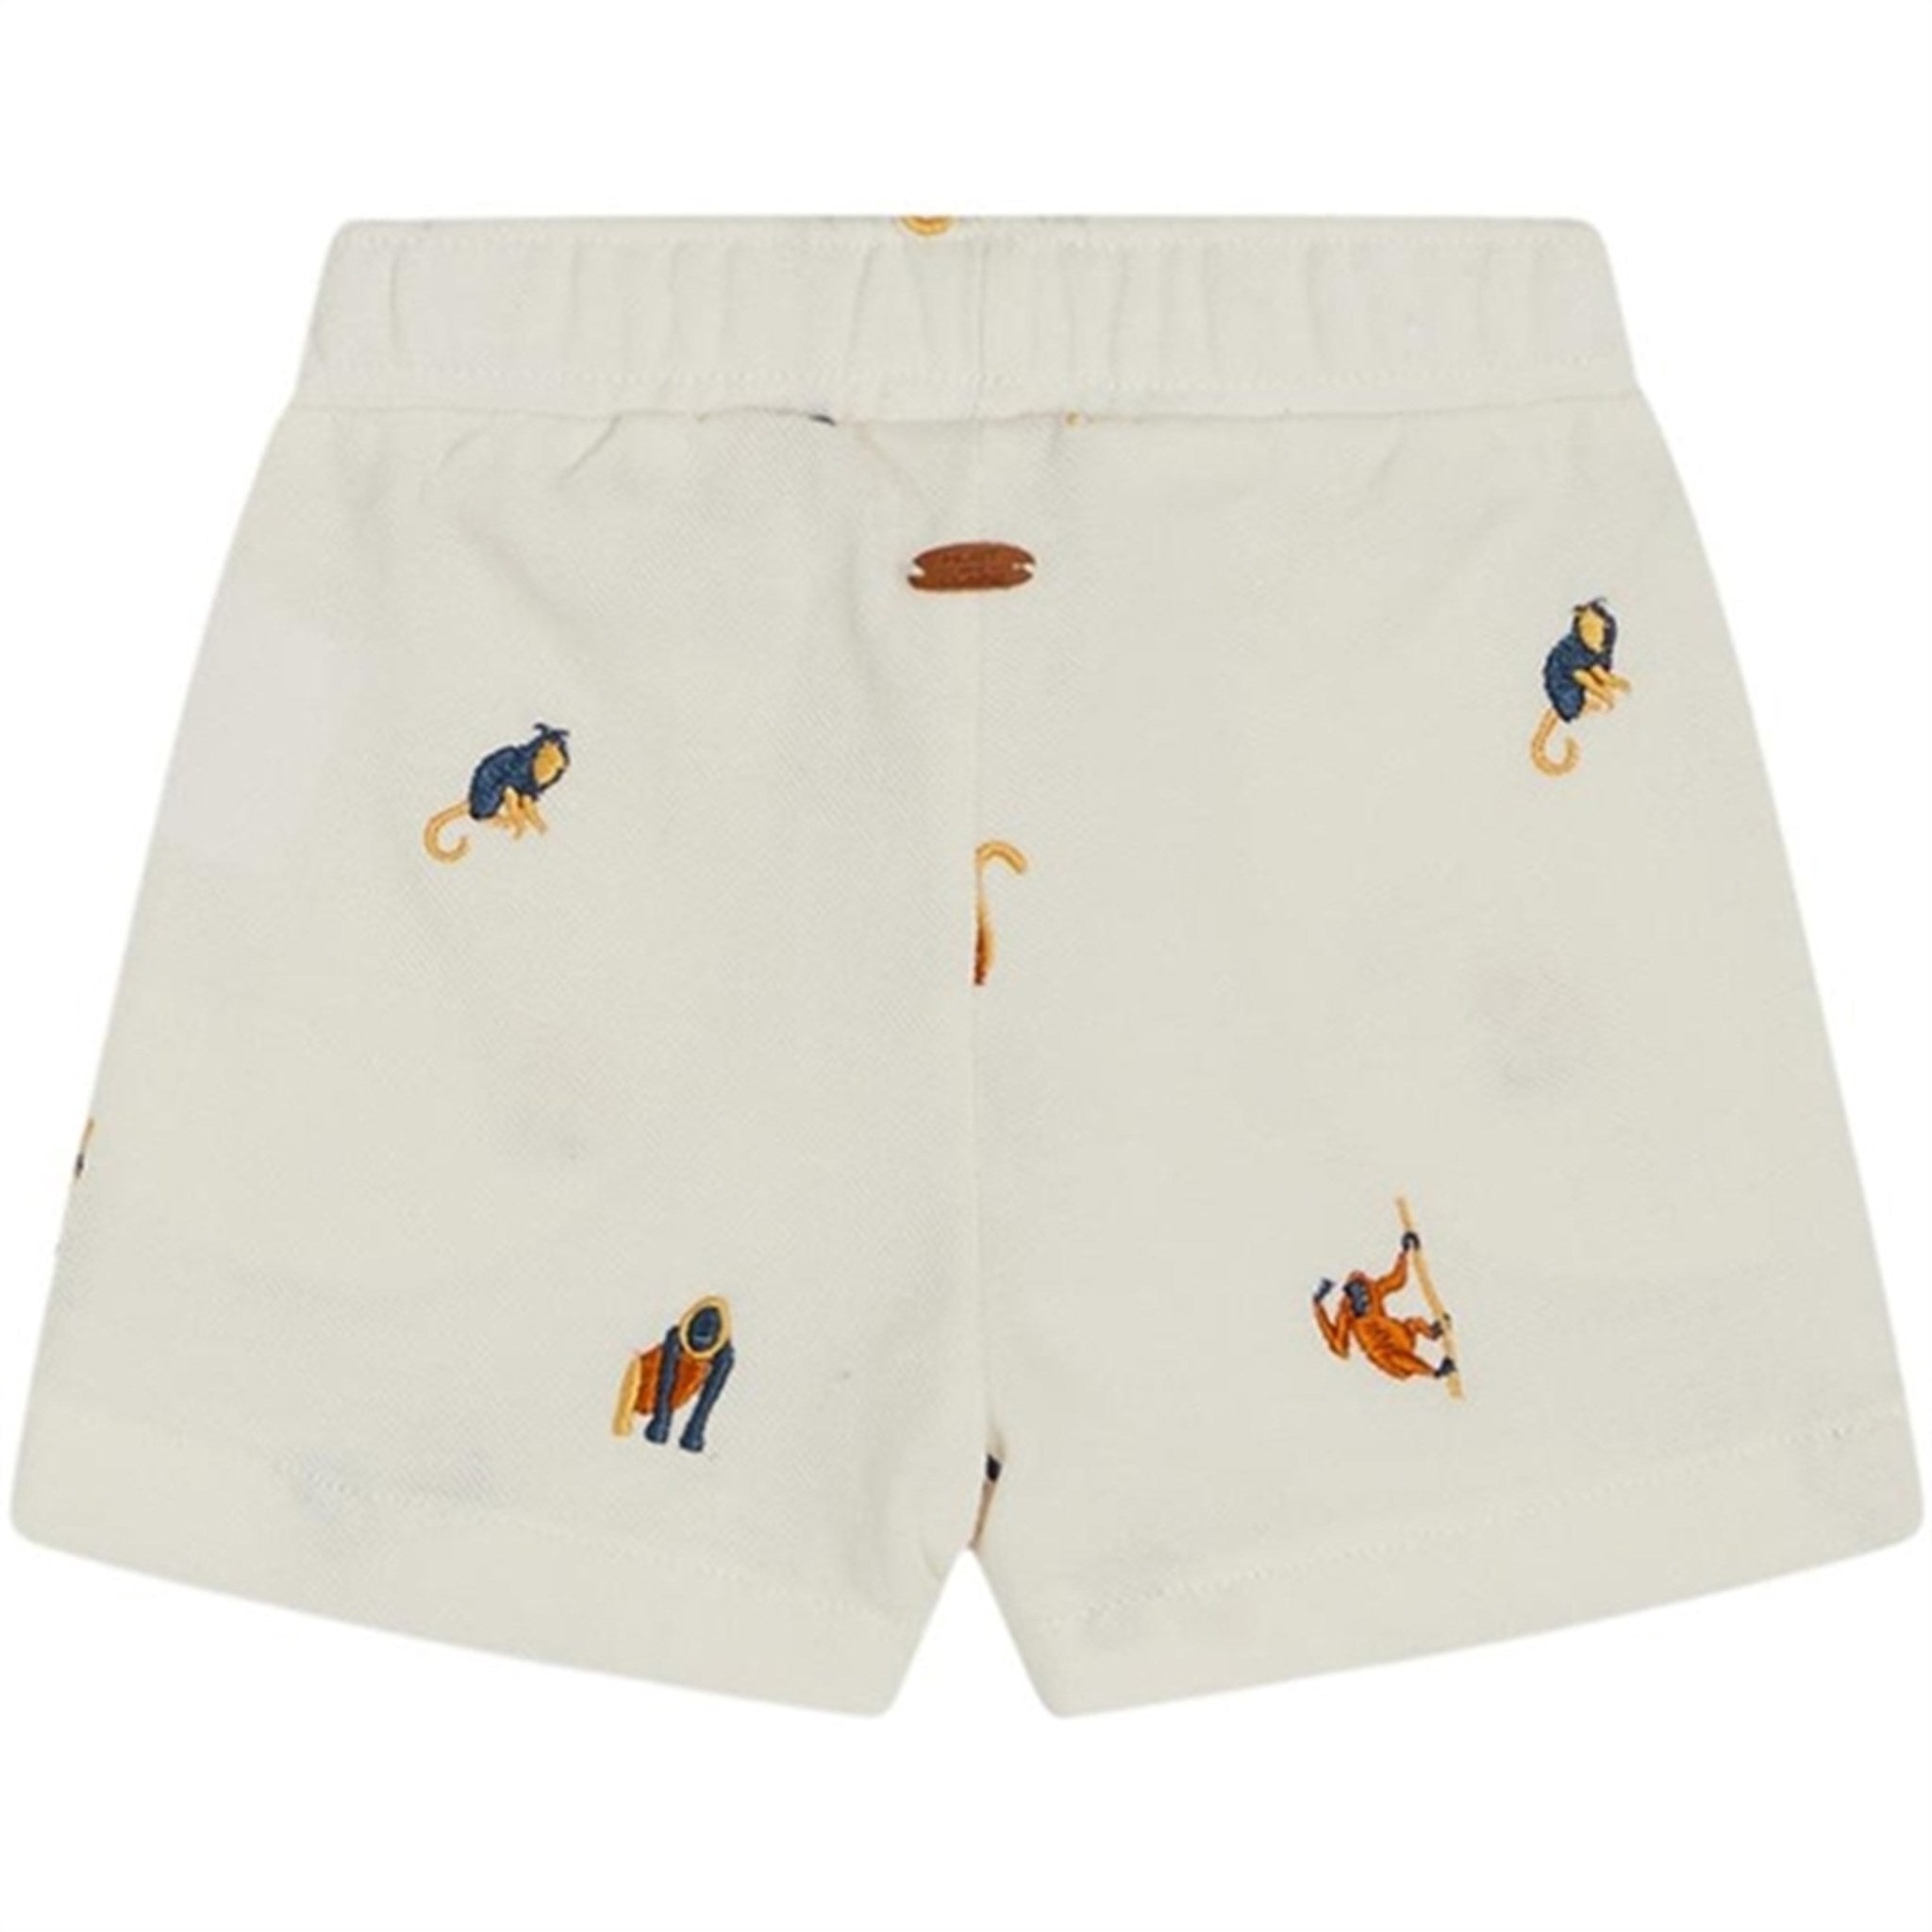 Hust & Claire Baby Harald Shorts Whisper 2